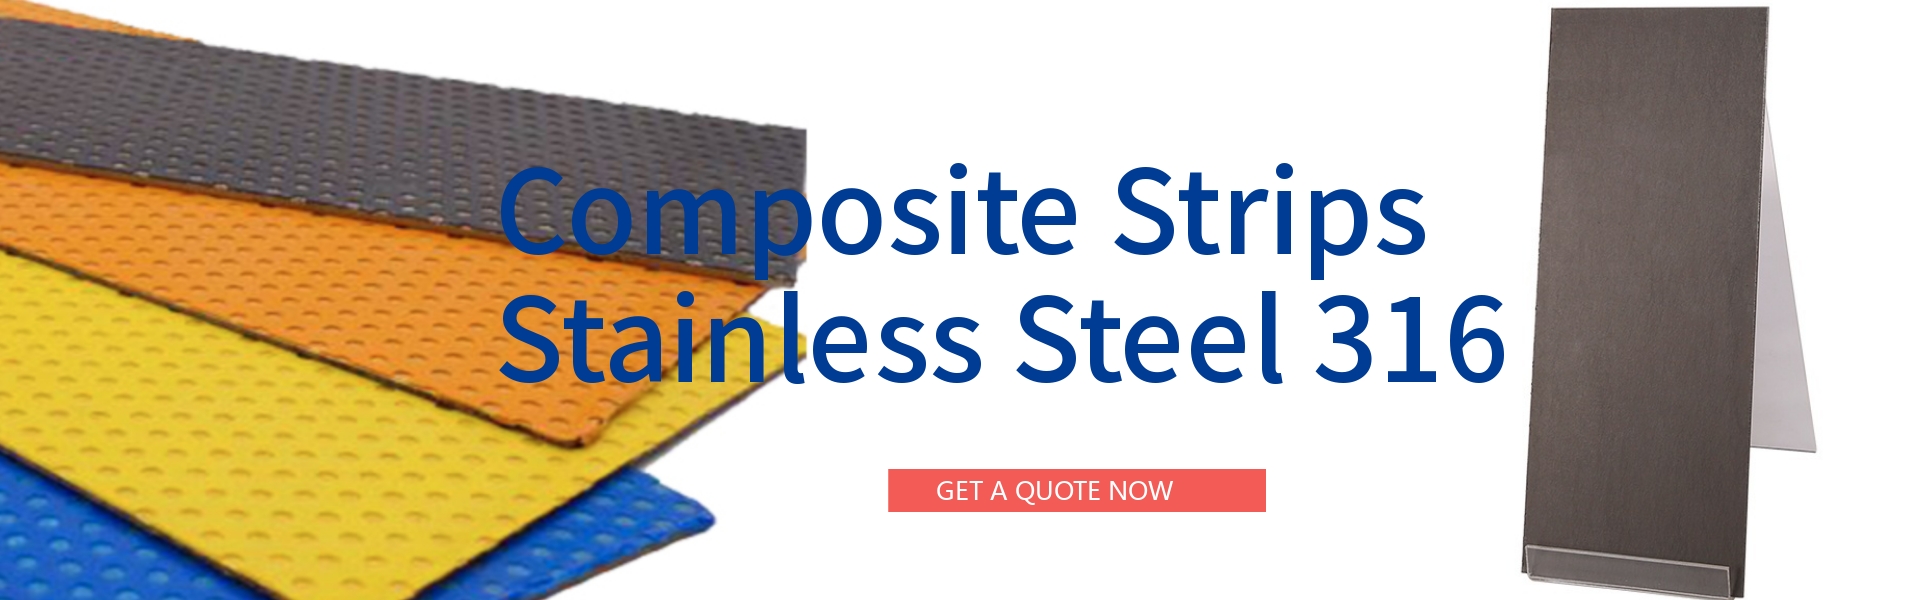 Composite Strips Stainless Steel 316